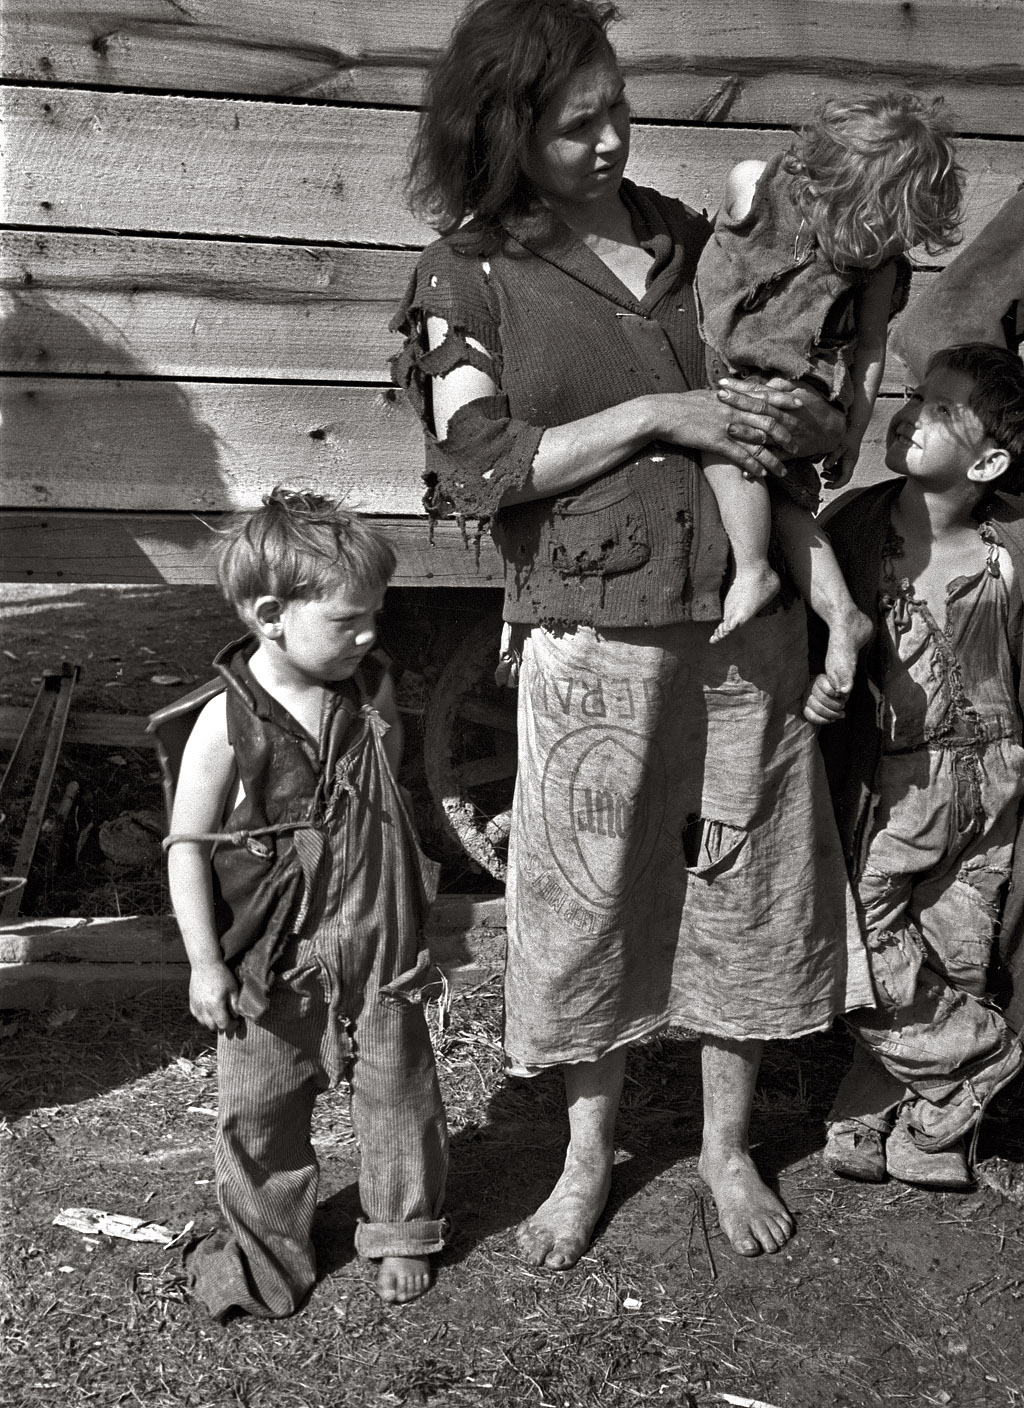 March 1936. "Mother and baby of family of nine living in field on U.S. Route 70 near the Tennessee River." 35mm nitrate negative by Carl Mydans for the Farm Security Administration. View full size.